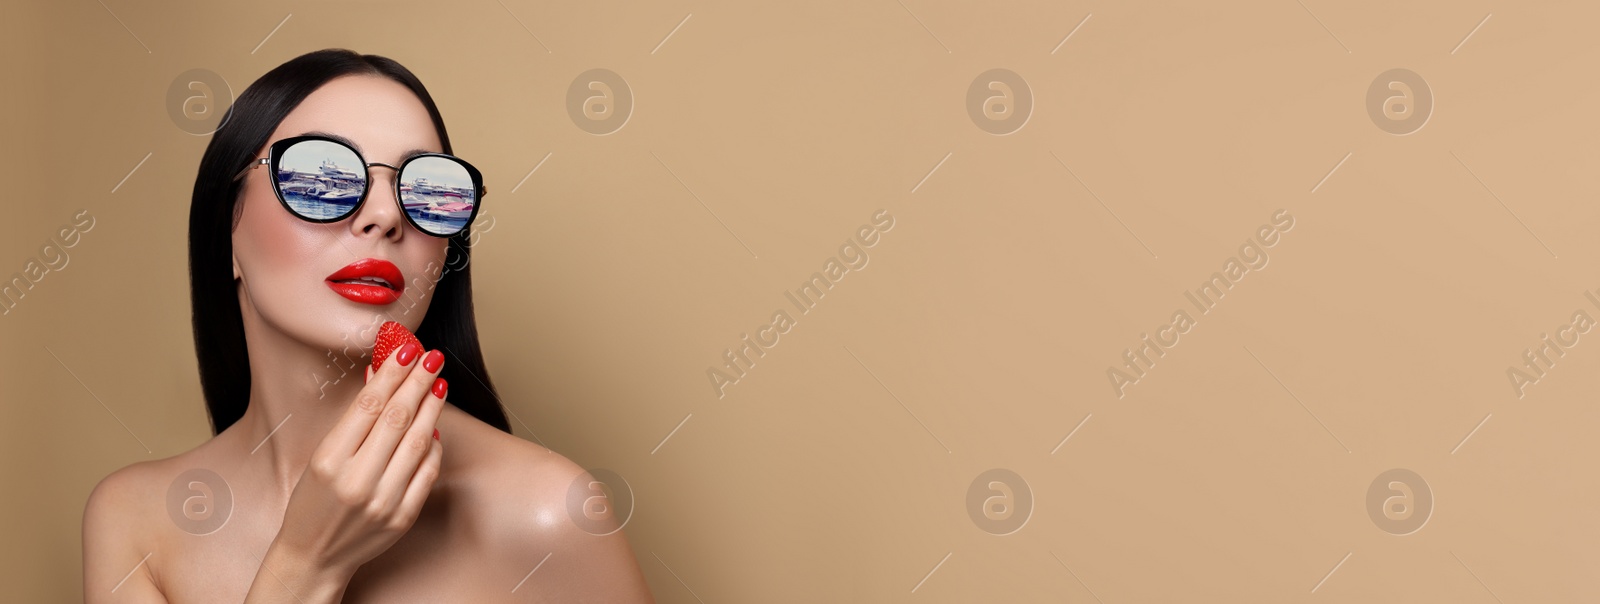 Image of Attractive woman in stylish sunglasses holding strawberry on dark beige background, space for text. Yachts reflecting in lenses. Banner design